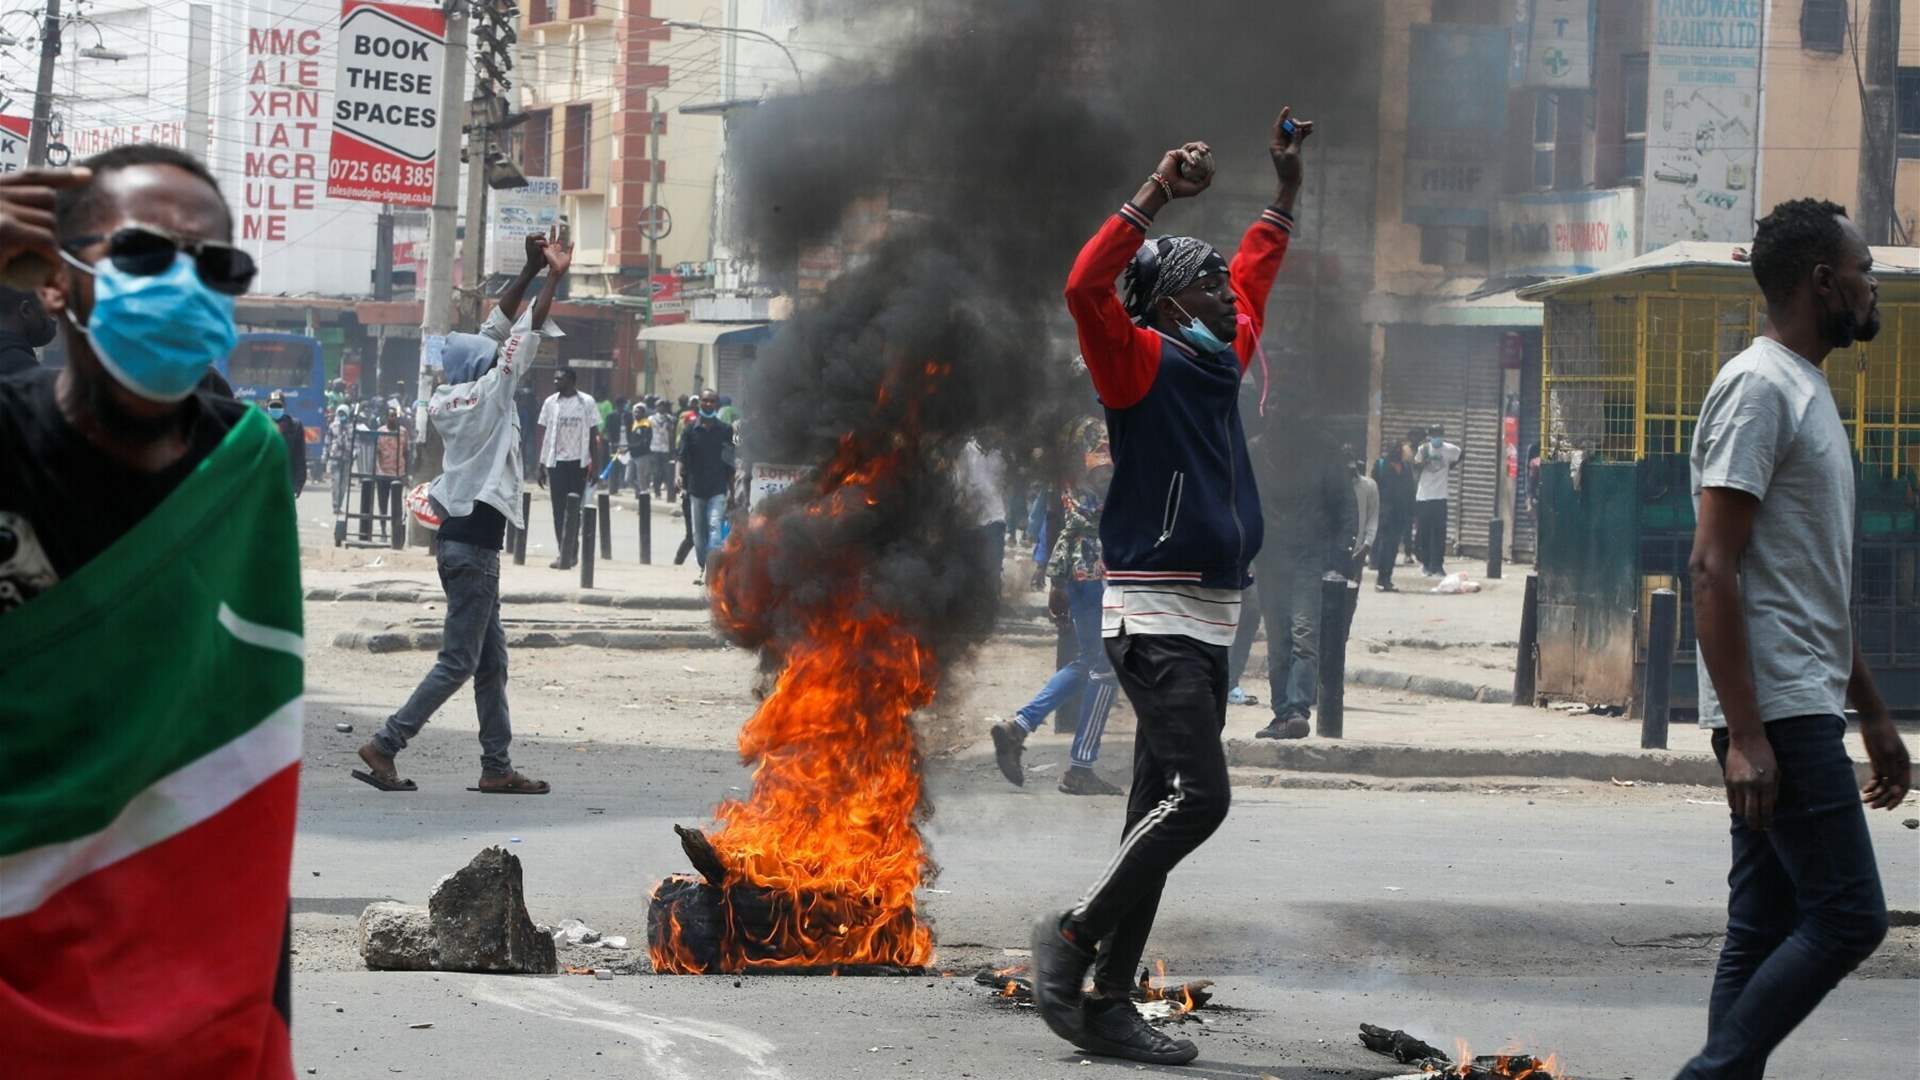 Kenya police chief resigns after deadly protests